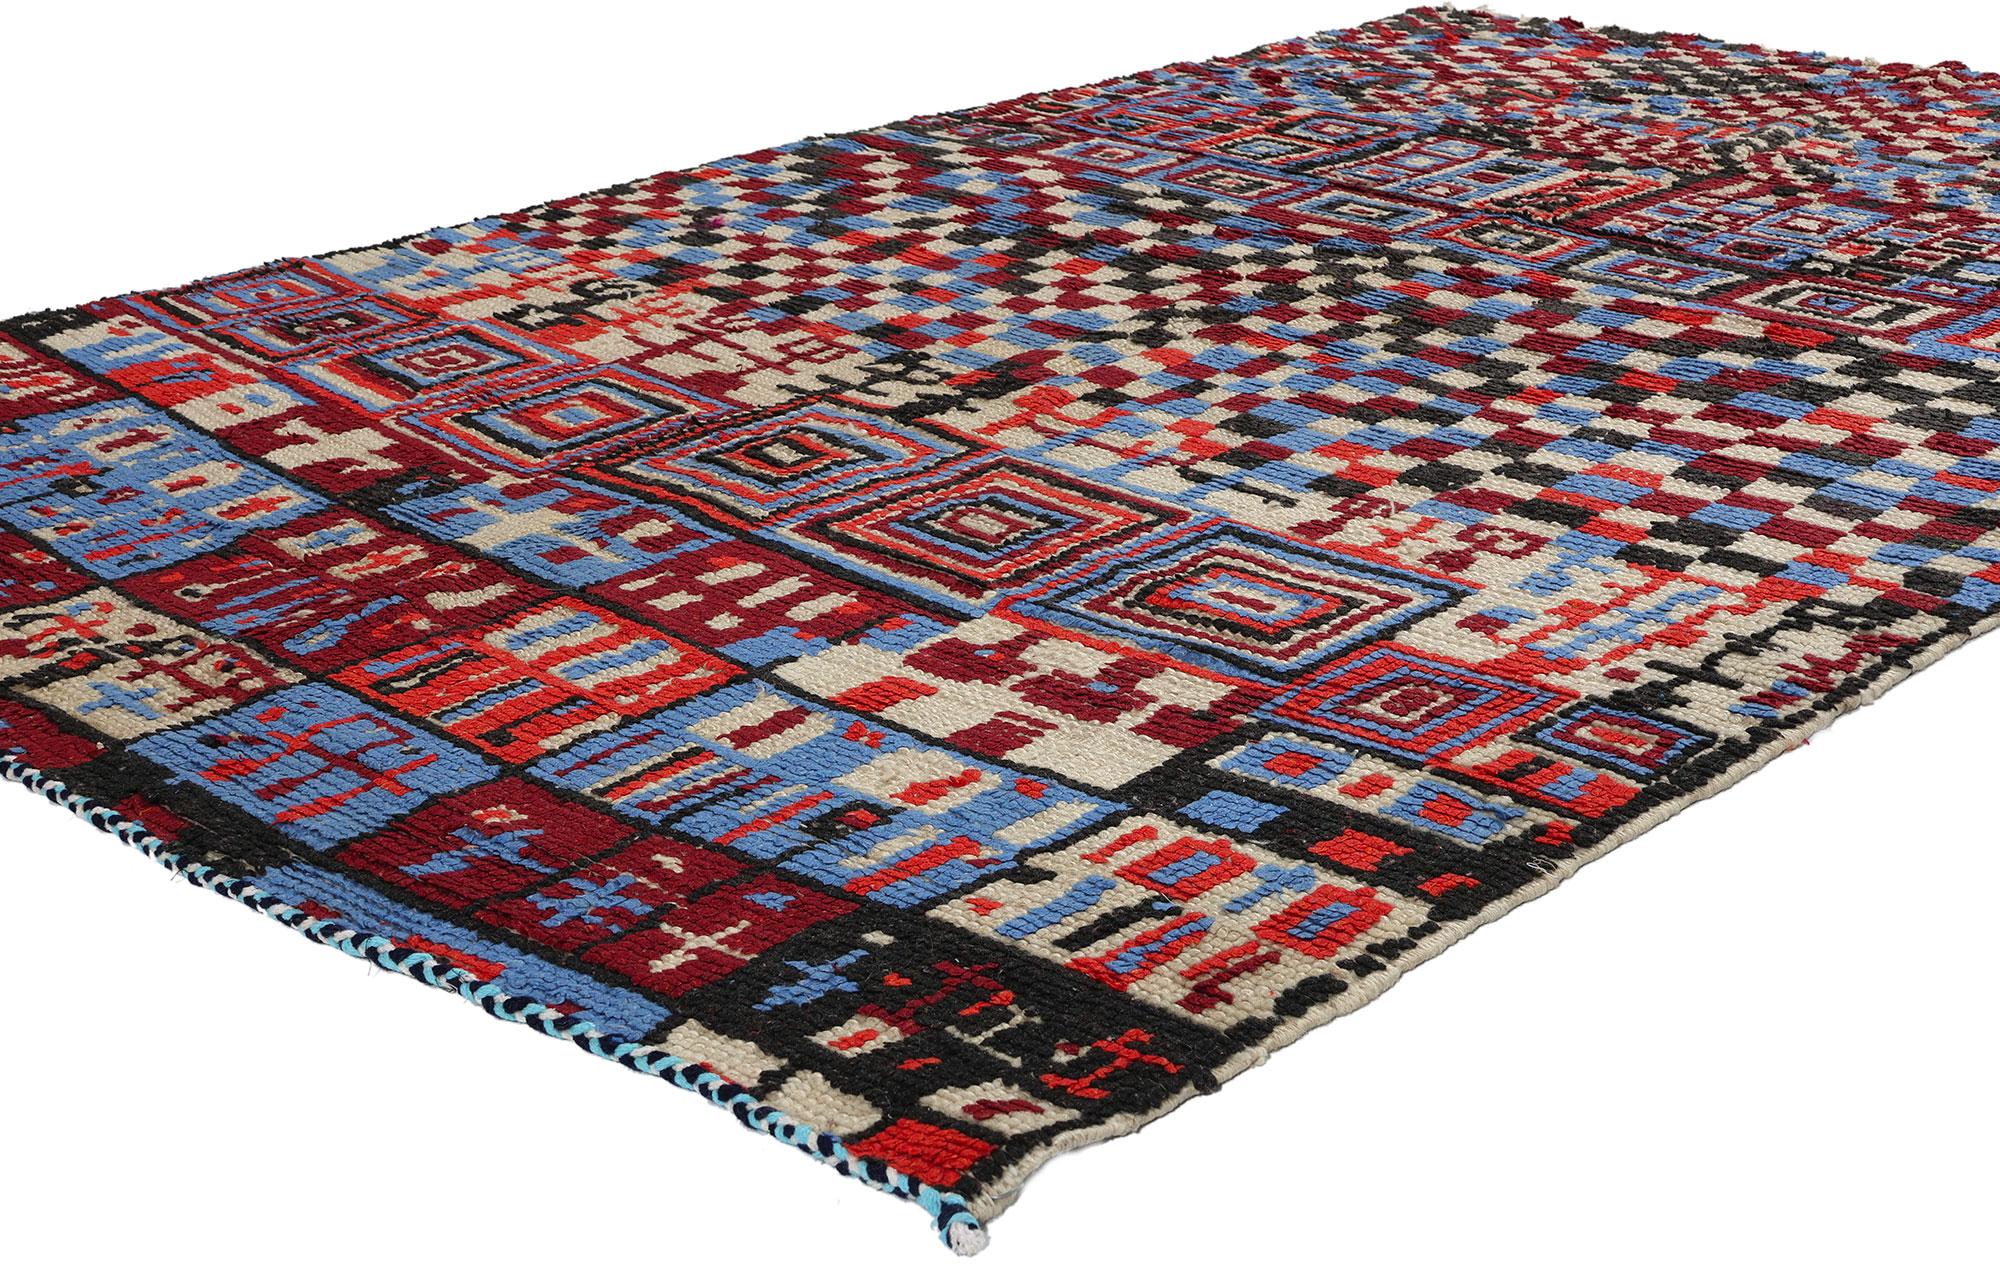 21759 Vintage Checkered Moroccan Azilal Rug, 04'08 x 07'09. From the vibrant heart of central Morocco's provincial capital, cradled in the embrace of the High Atlas Mountains, unfolds the splendid legacy of Azila rugs – a distinctive manifestation